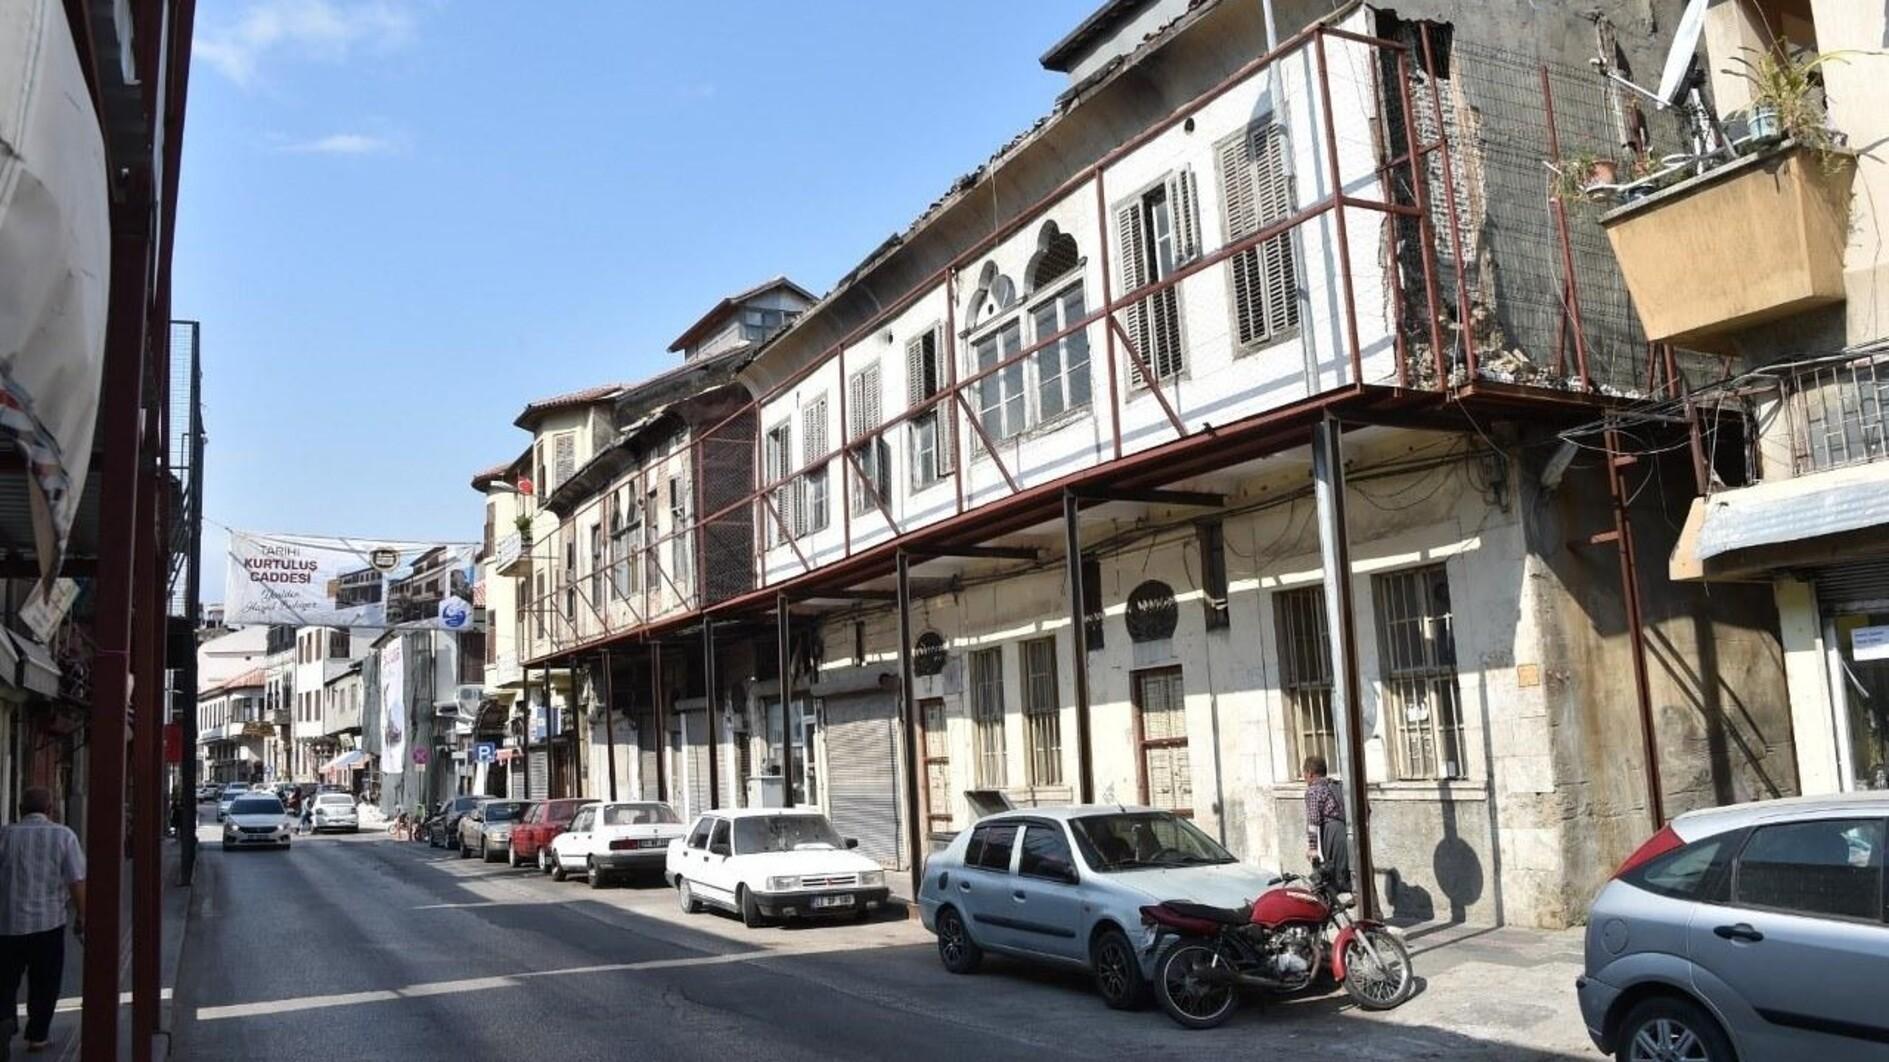 Culture Ministry works on structures in Hatay